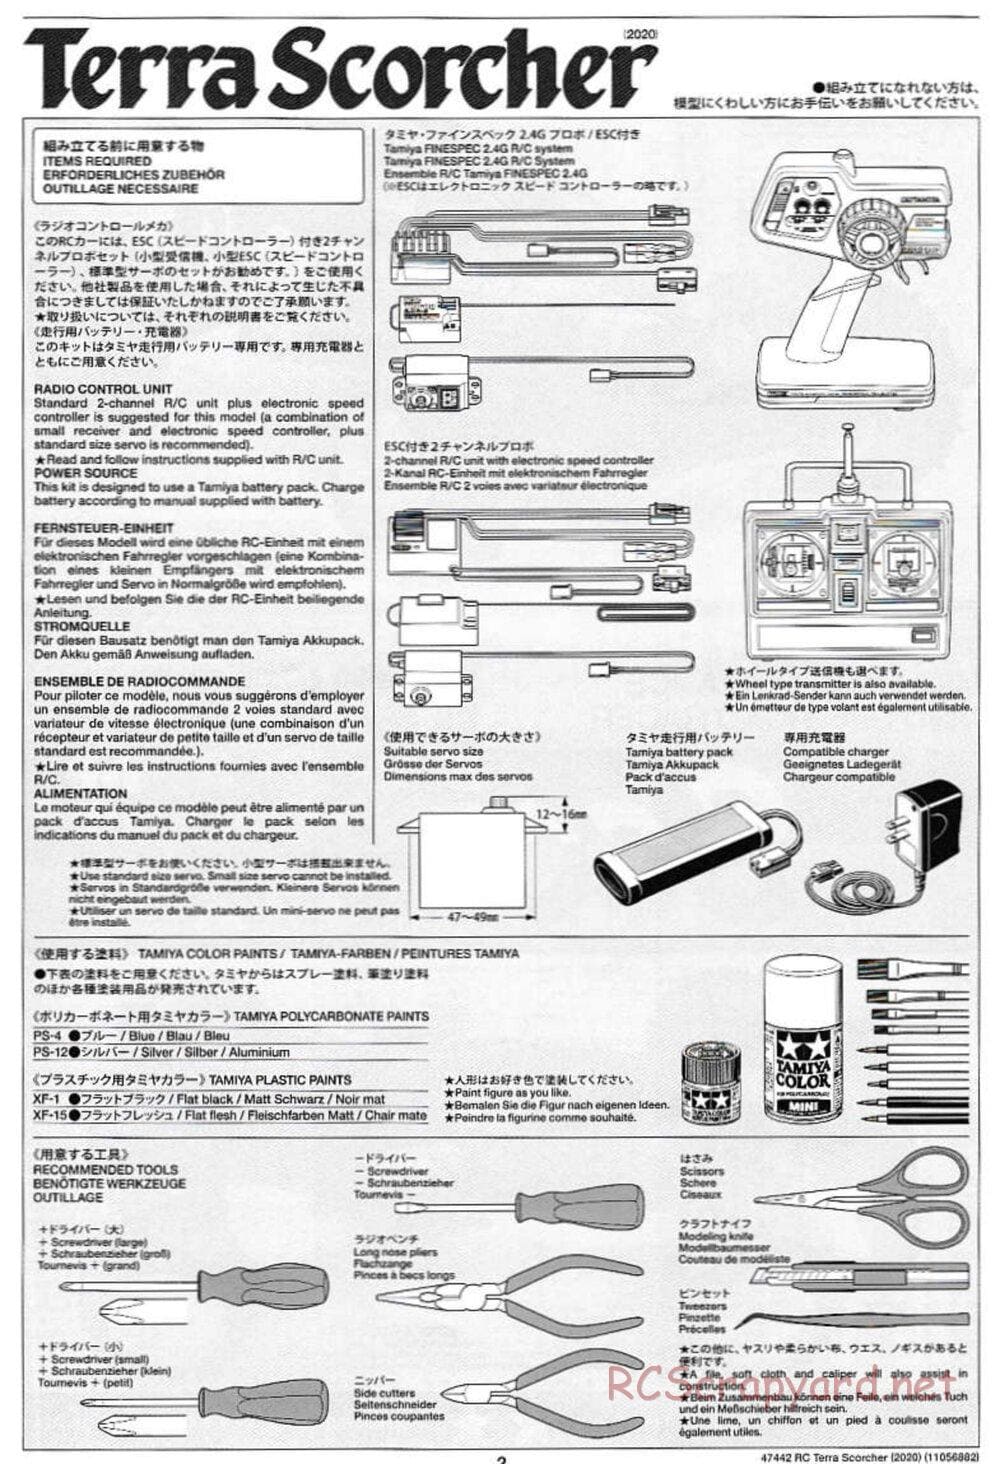 Tamiya - Terra Scorcher 2020 Chassis - Manual - Page 2